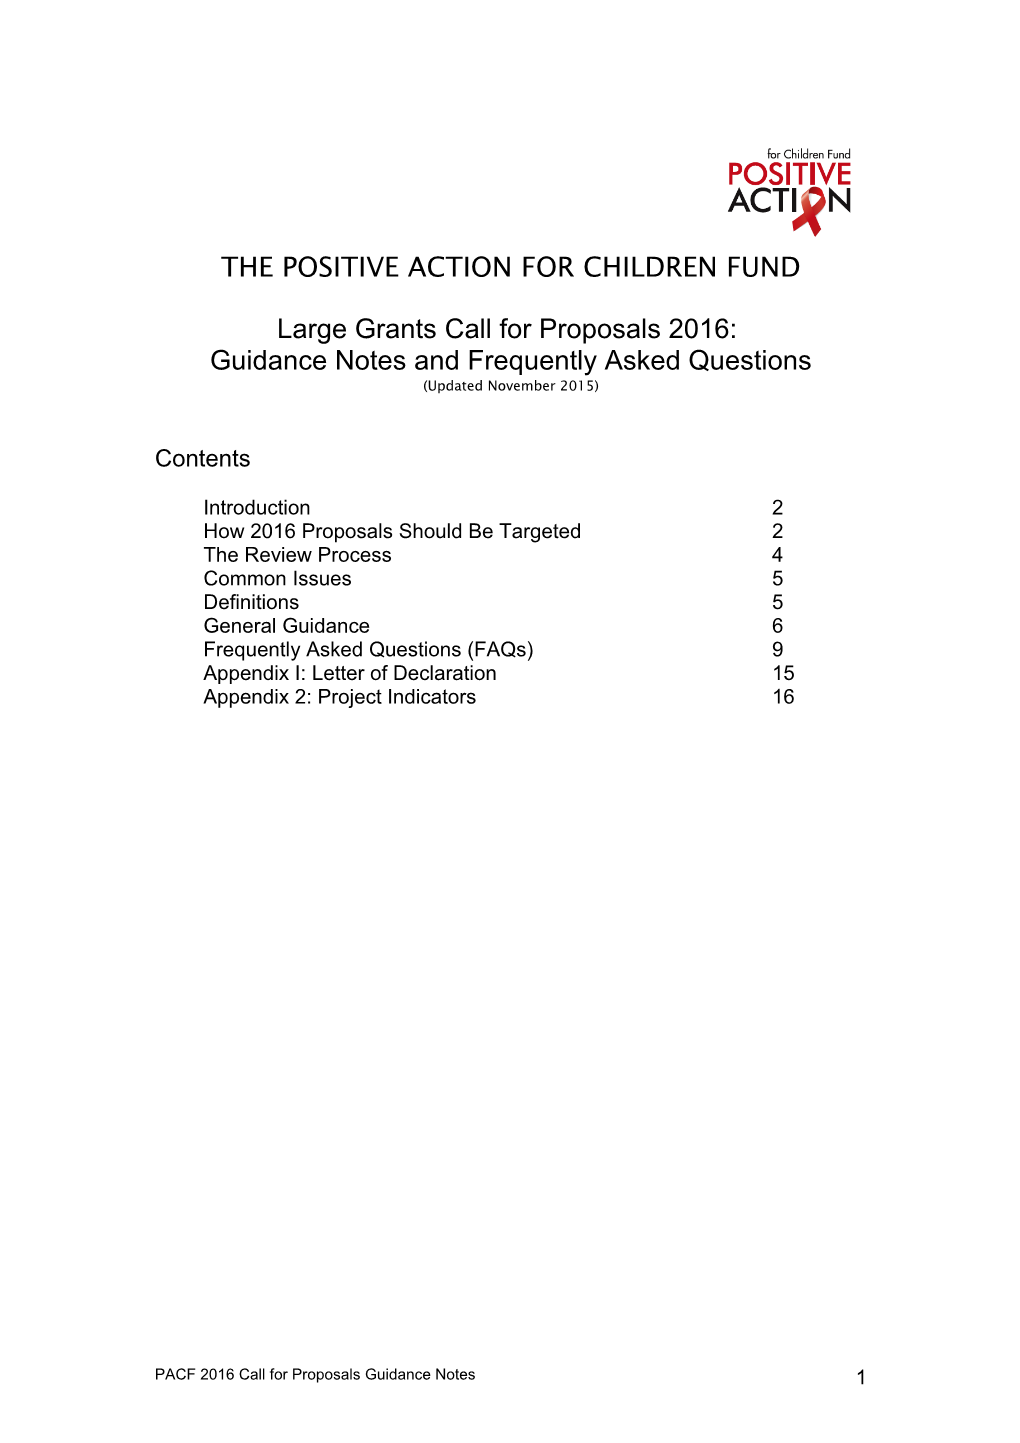 The Positive Action for Children Fund